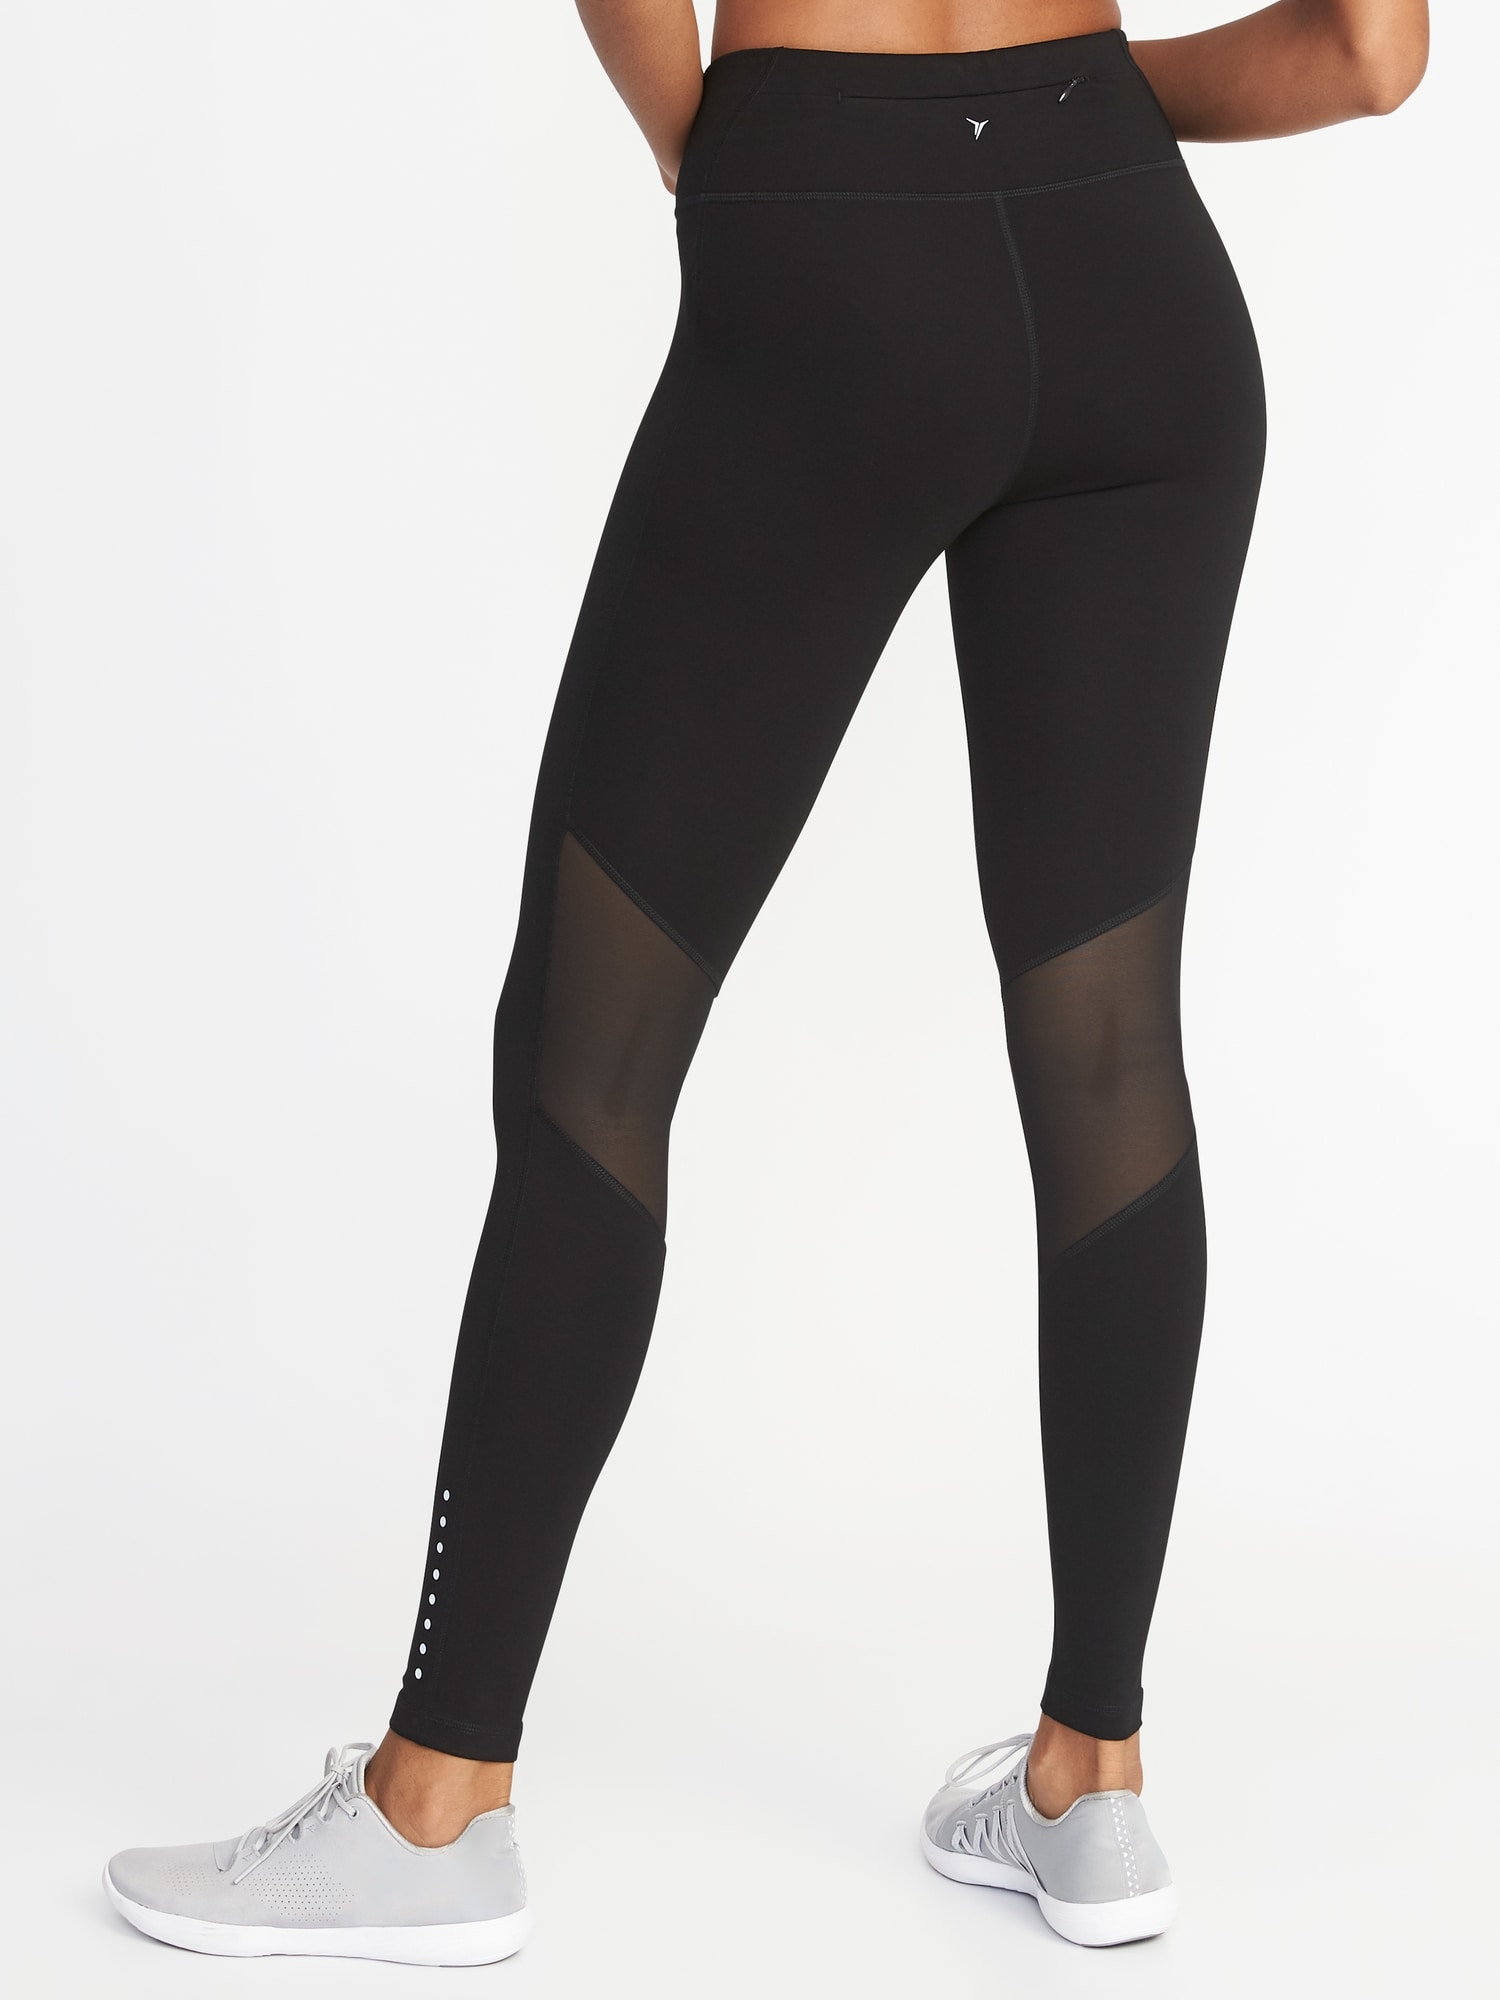 Mid-Rise Elevate Lightweight Compression Run Leggings for Women